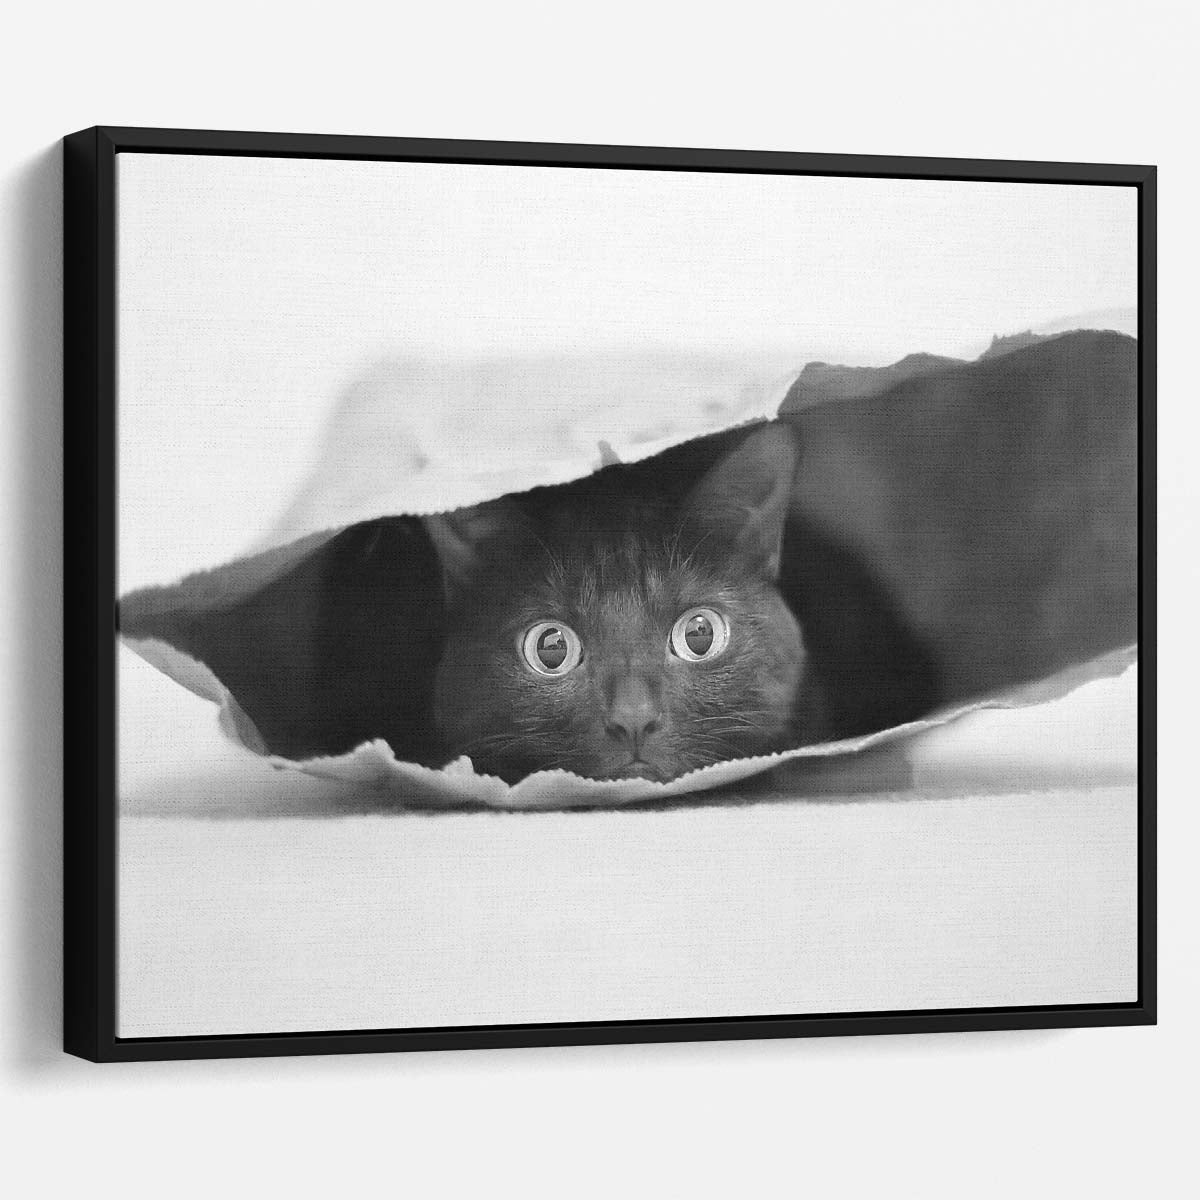 Curious Cat in Shopping Bag Humor Monochrome Wall Art by Luxuriance Designs. Made in USA.